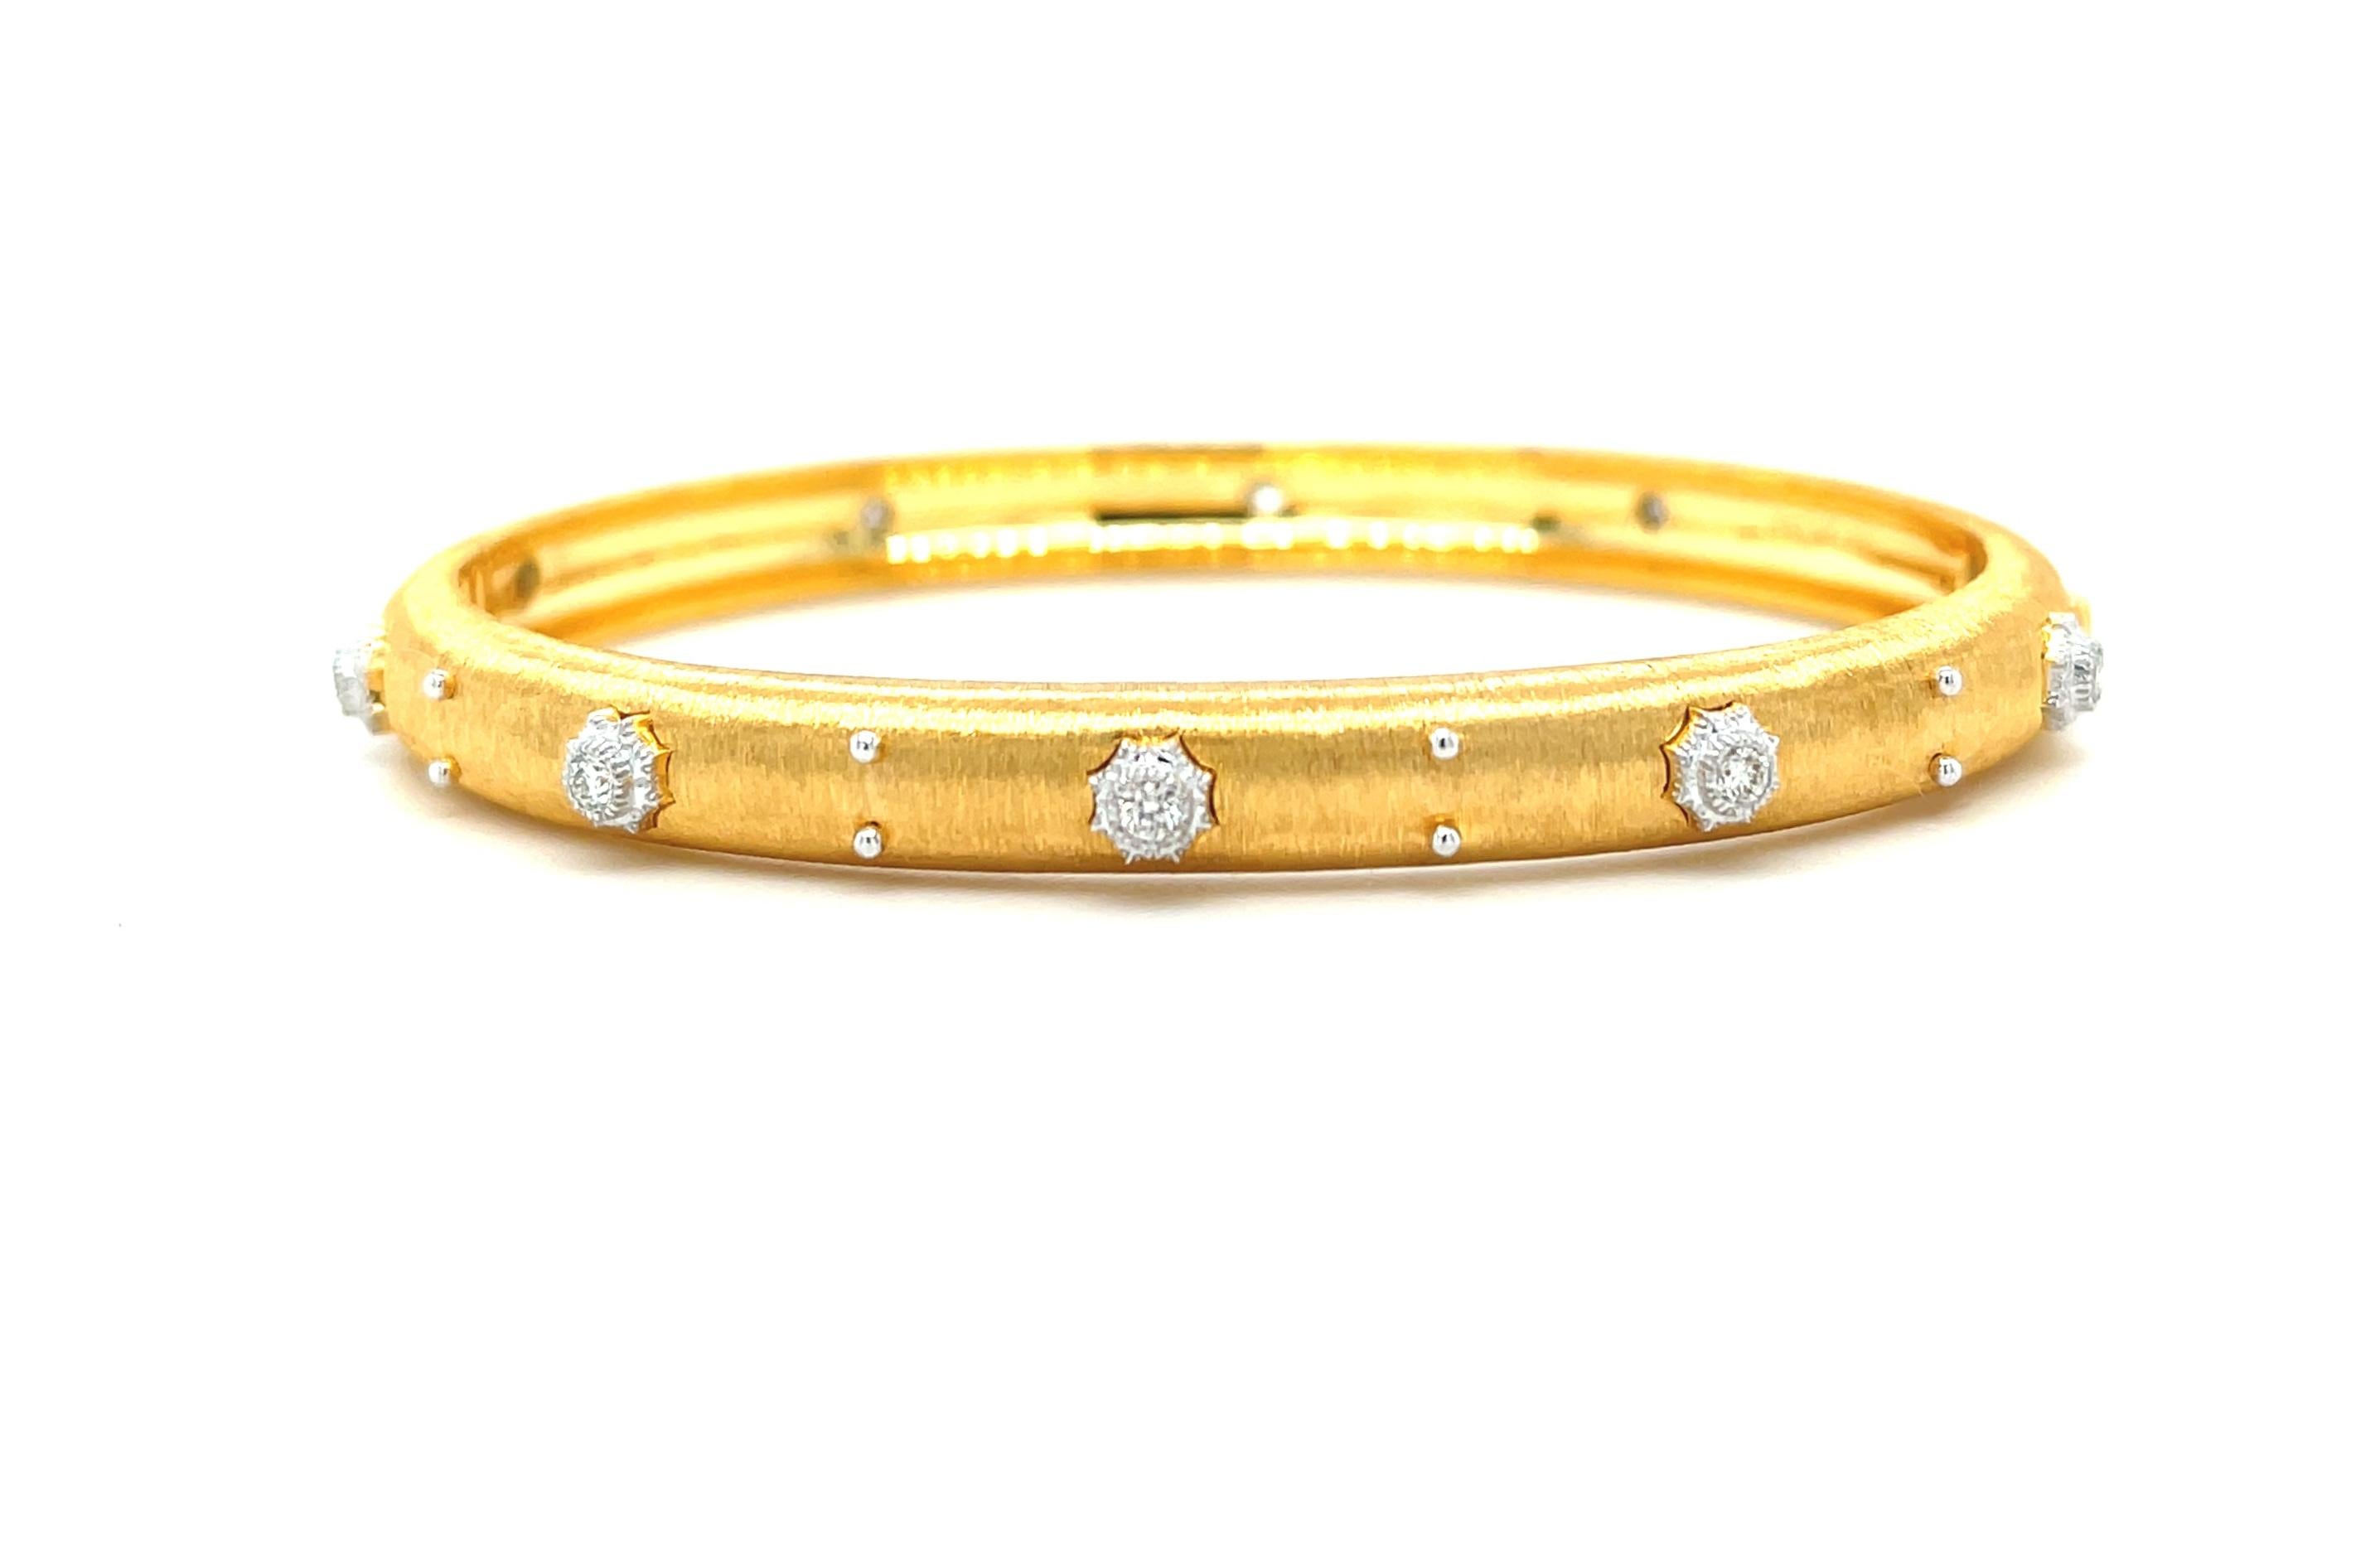 This elegant, 18k yellow gold bangle bracelet is really eye-catching! The bangle is finely textured with a beautiful satin finish, and is set with 10 sparkling white diamonds! Each diamond is set in its own 18k white gold, intricately detailed